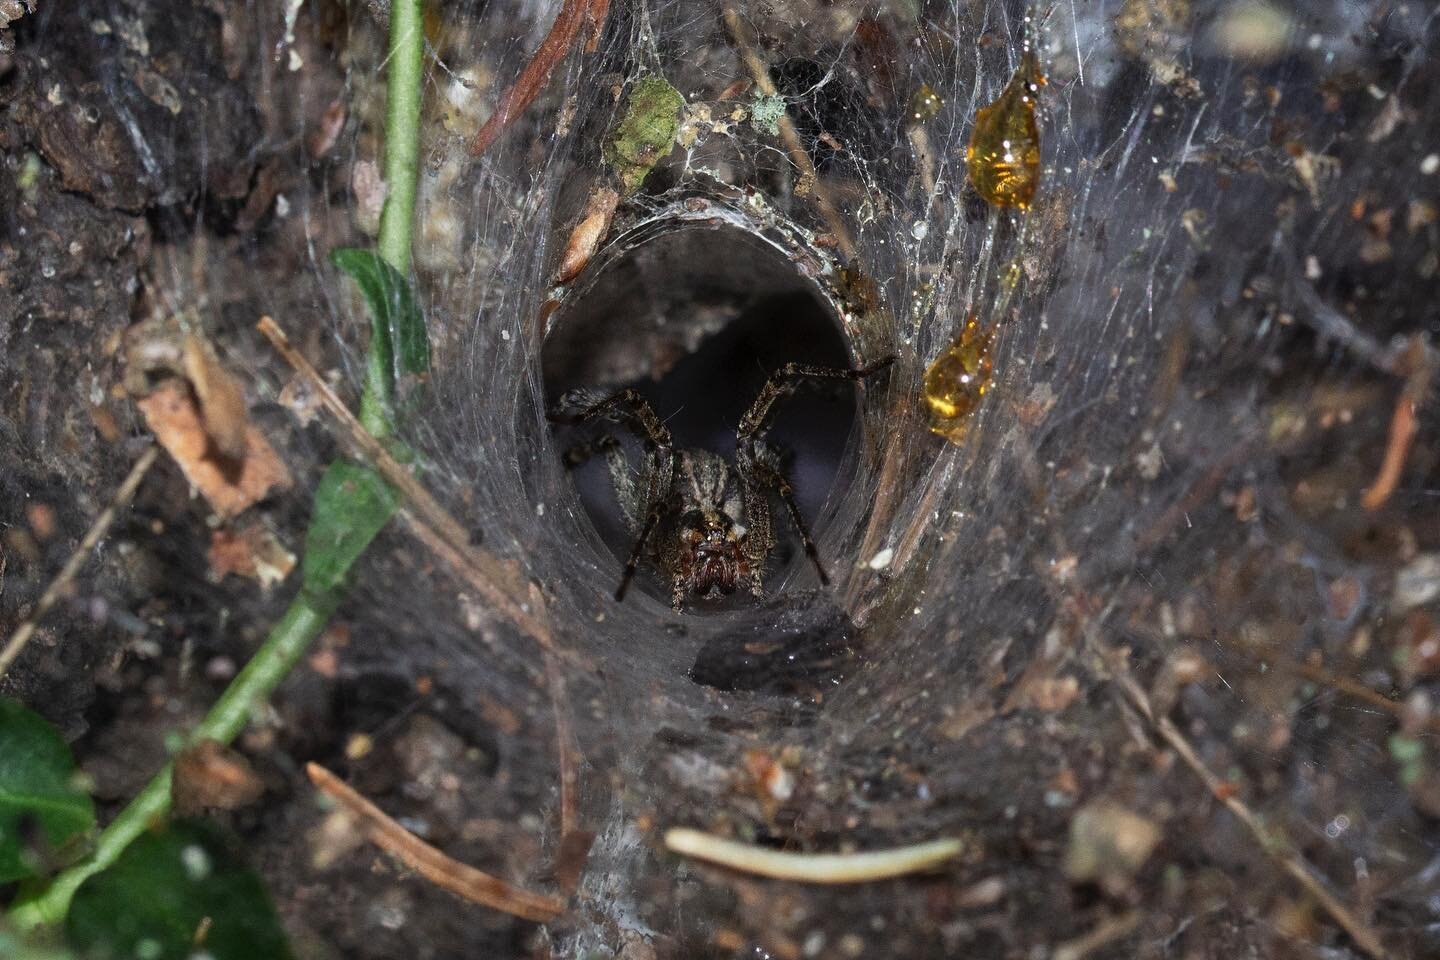 A spider coming out of its hidey hole 😬

#photography #insects #insectphotography #spider #photo #closeup #nature